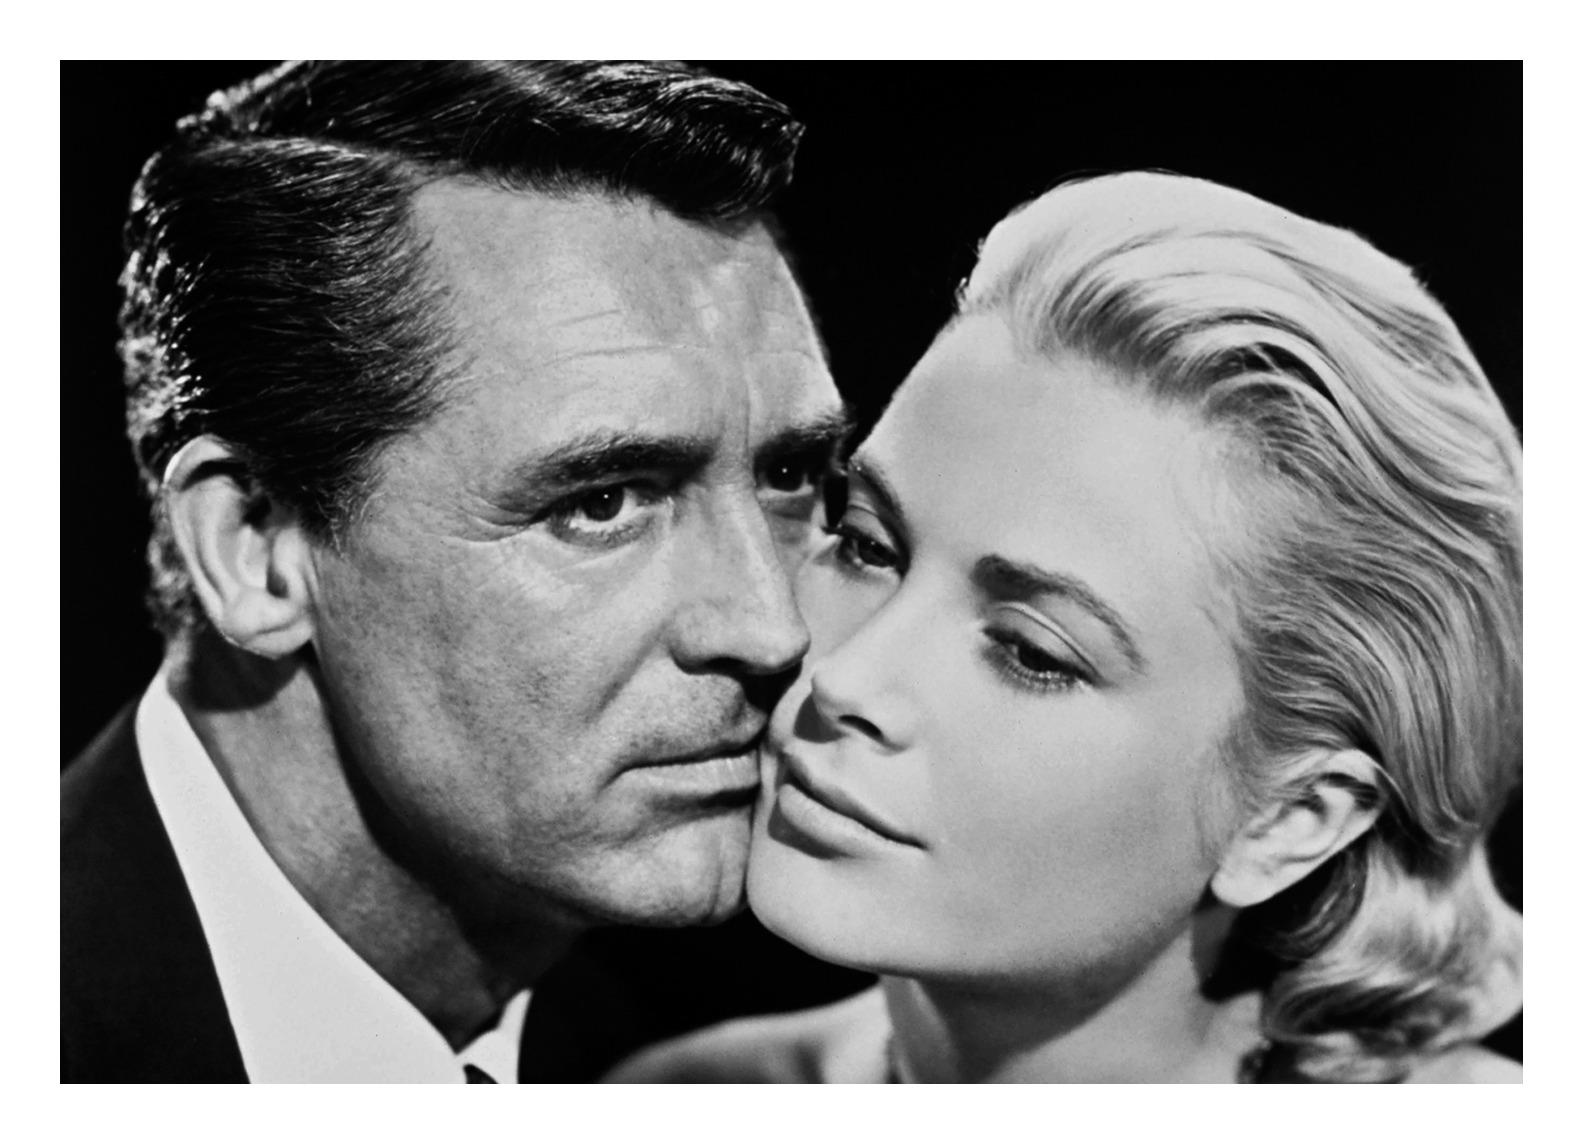 Cary Grant and Grace Kelly in To Catch a Thief - Photograph by Unknown